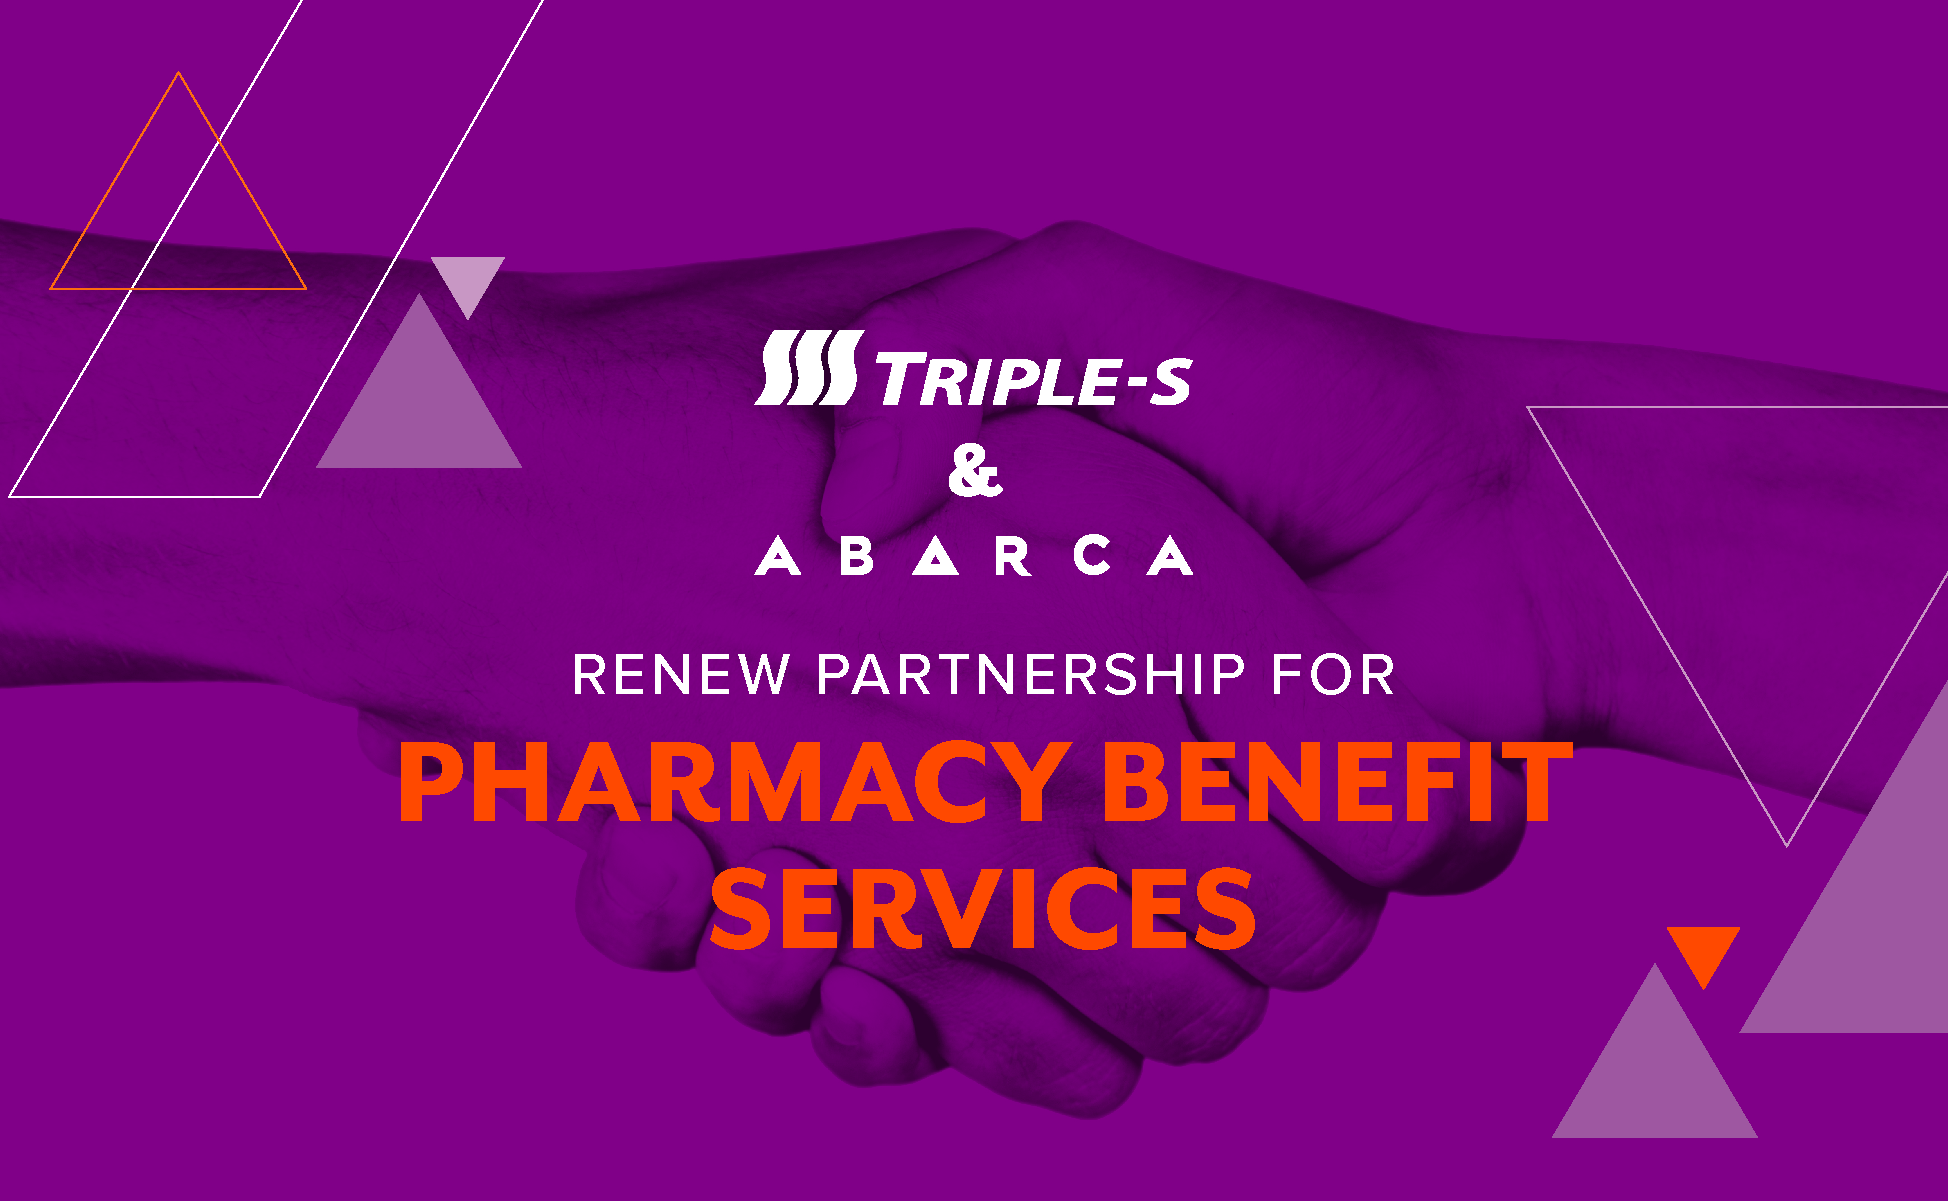 Triple-S and Abarca renew, expand partnership for pharmacy benefit services